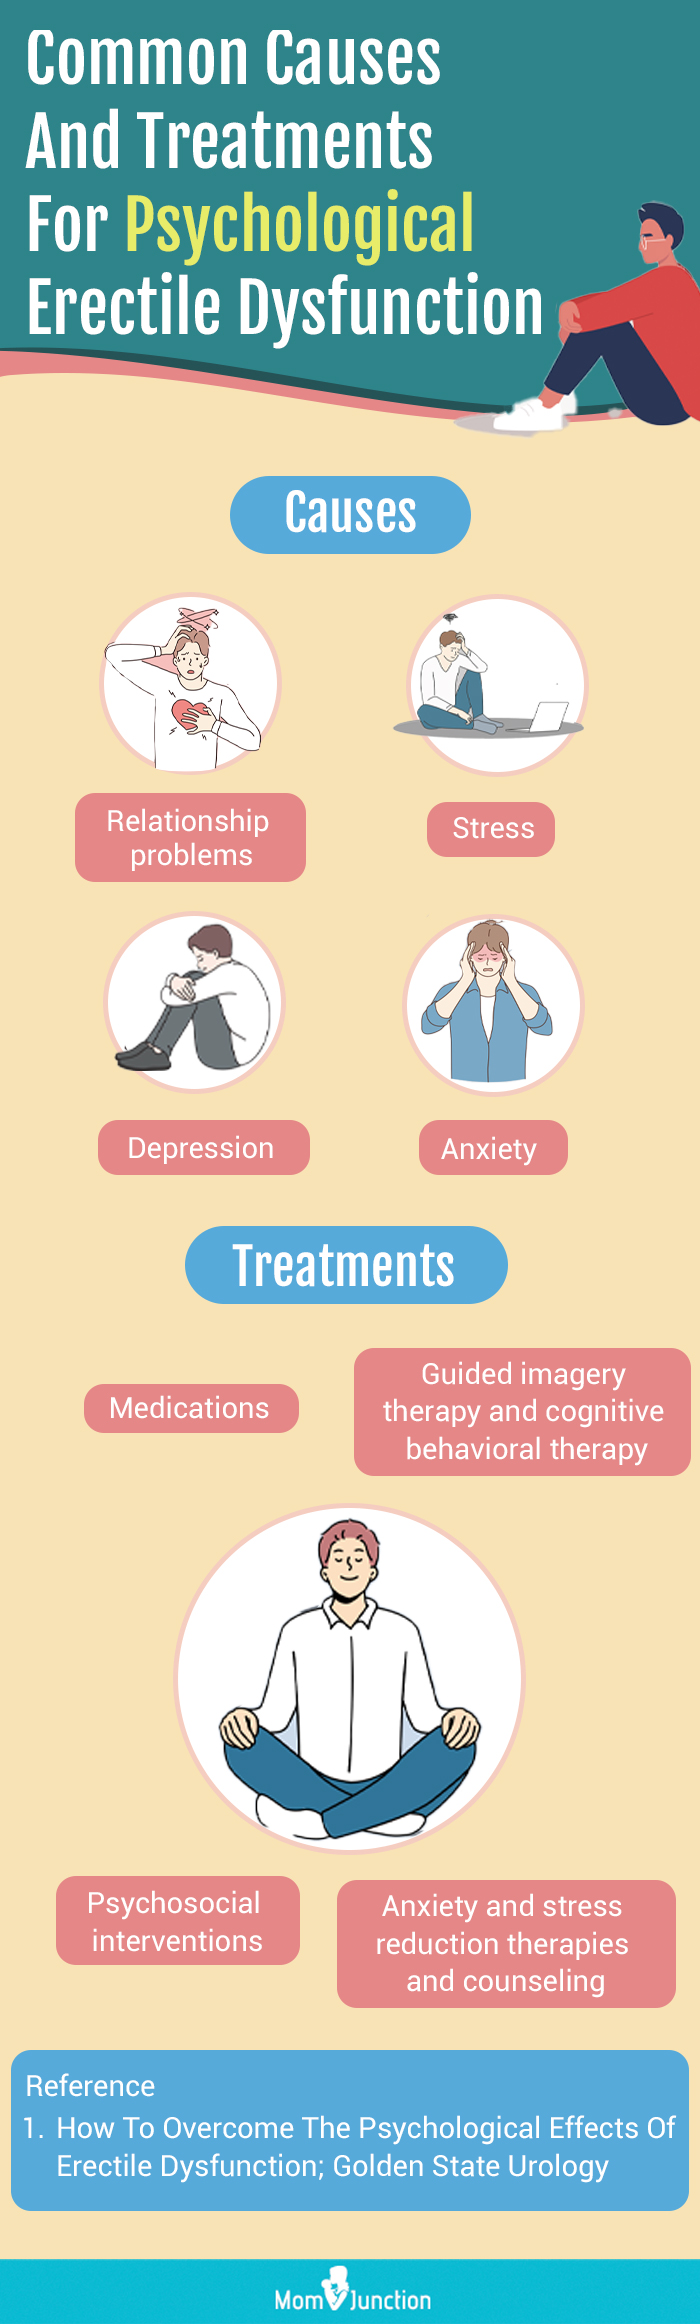 treatments of psychological erectile dysfunction in teens [infographic]